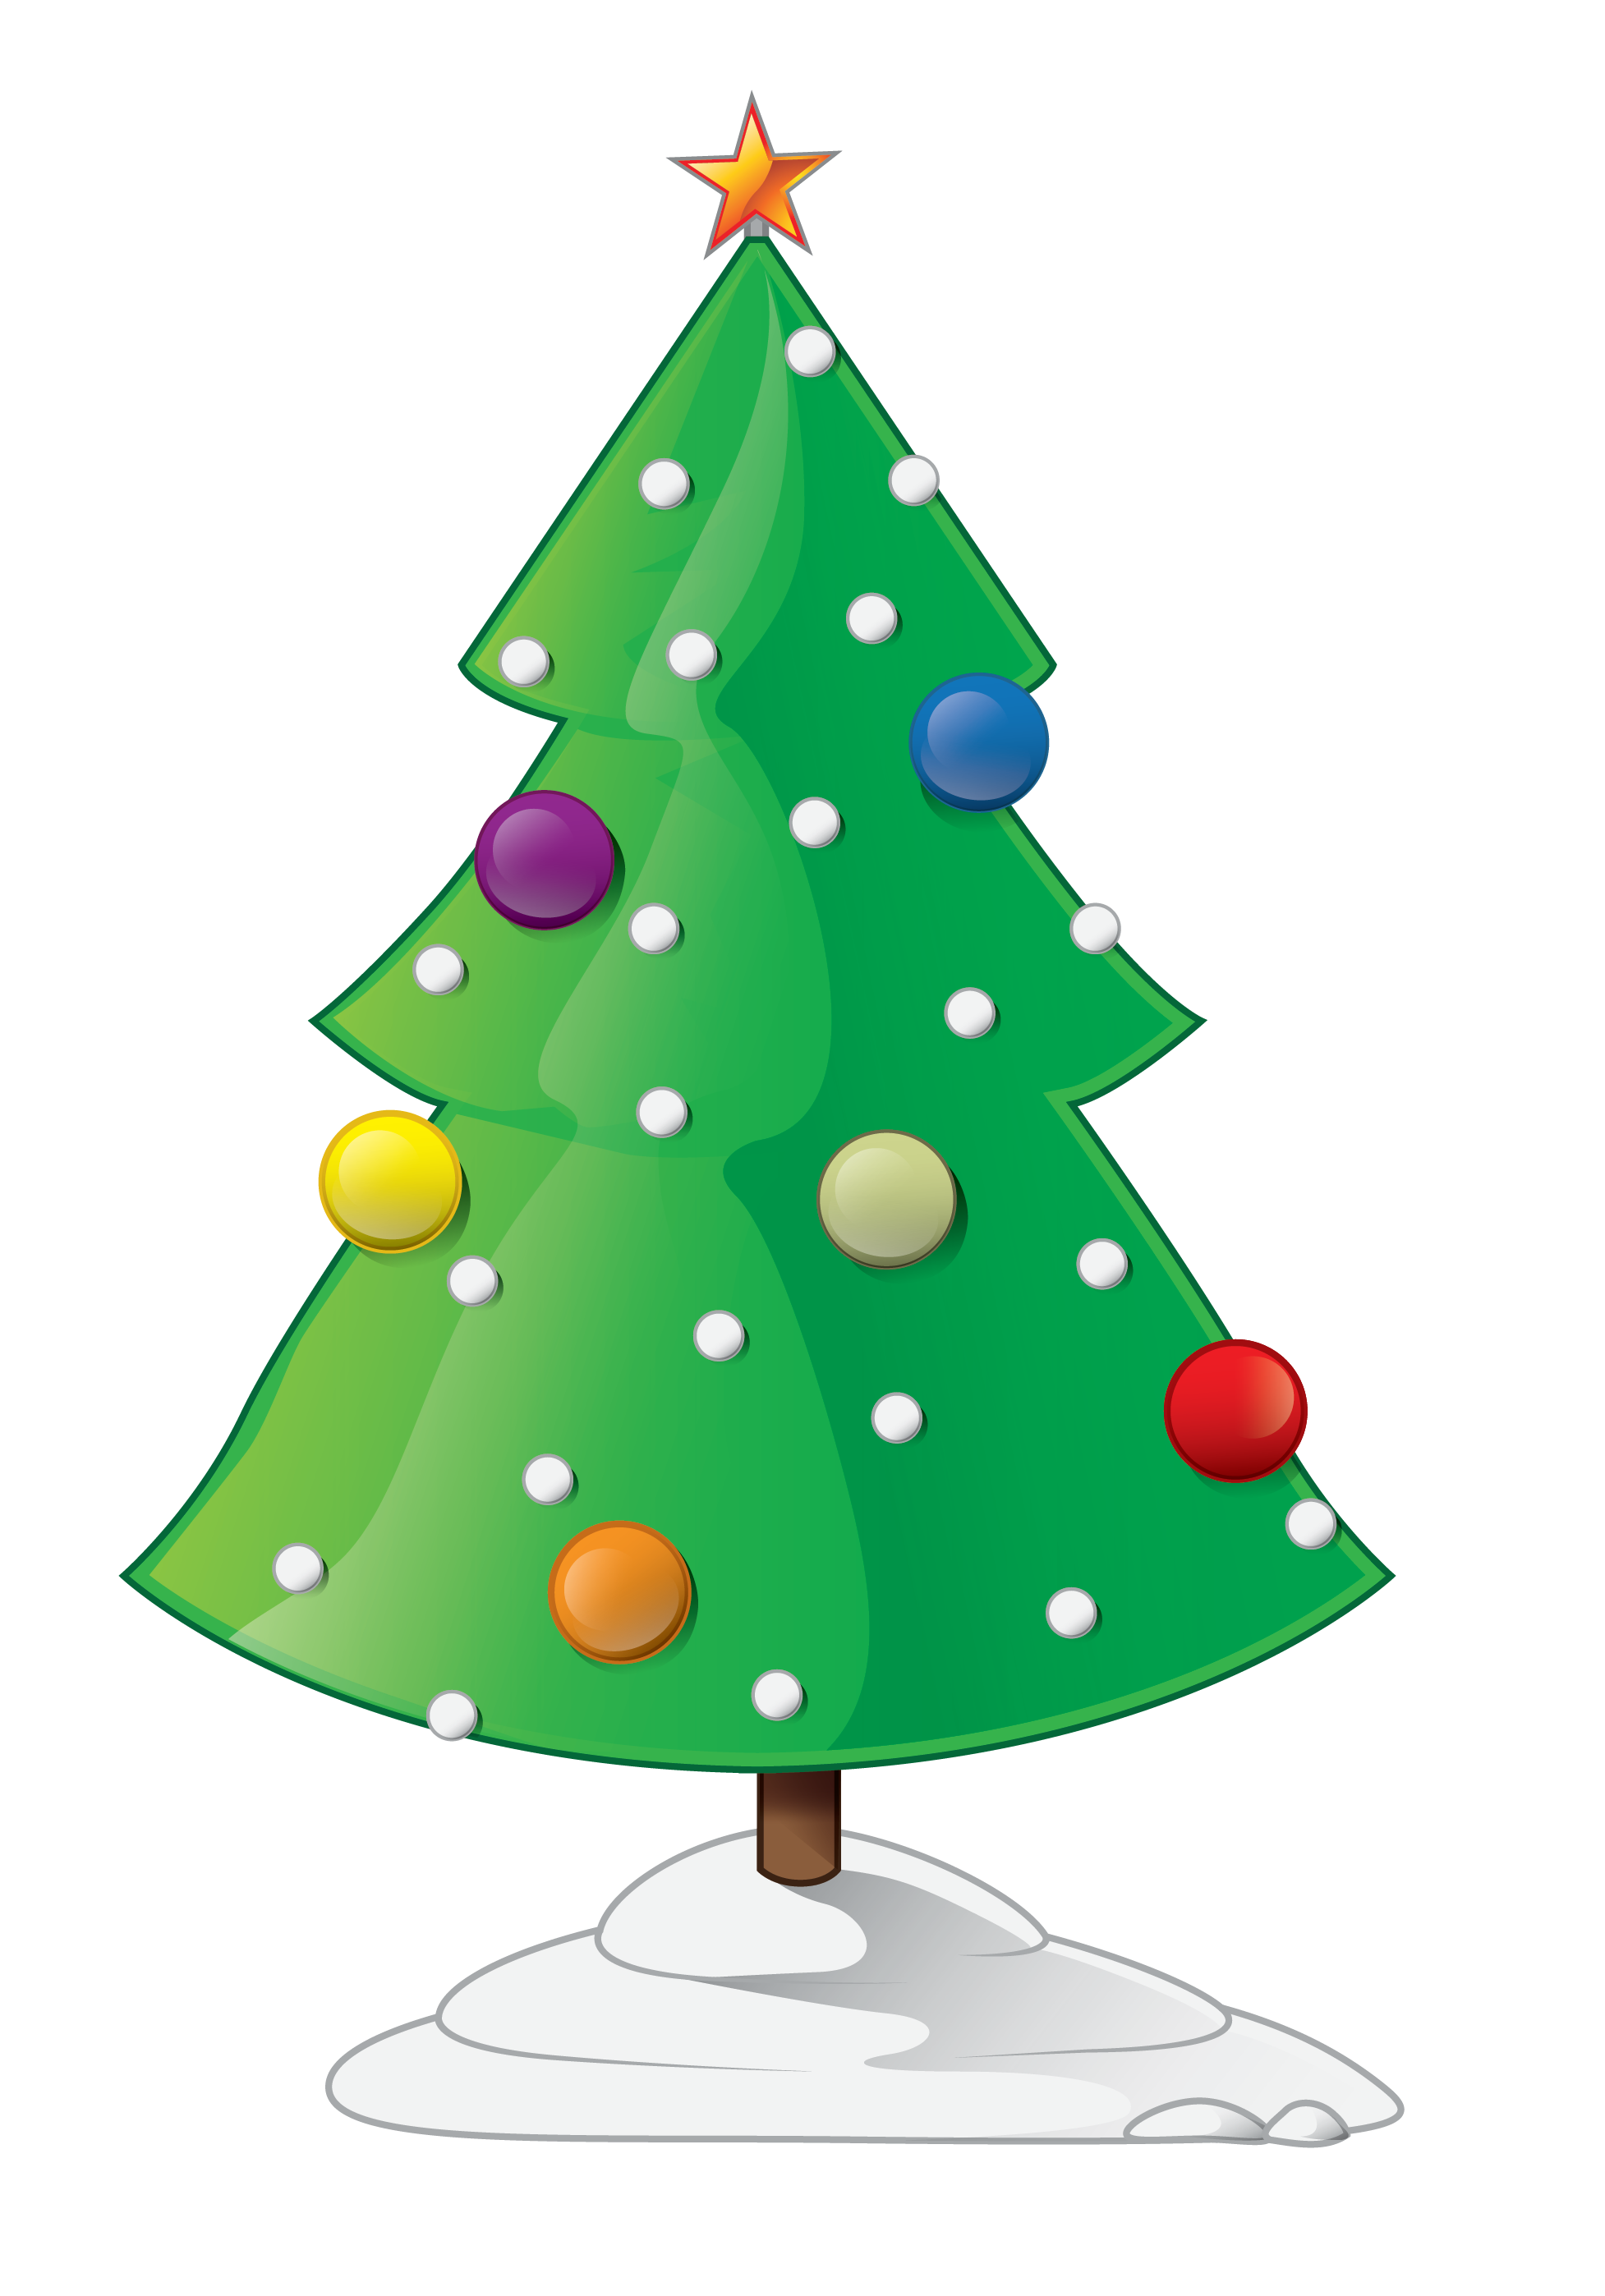 Christmas Tree Png Cartoon - Funny Cartoon Trees - ClipArt Best : All